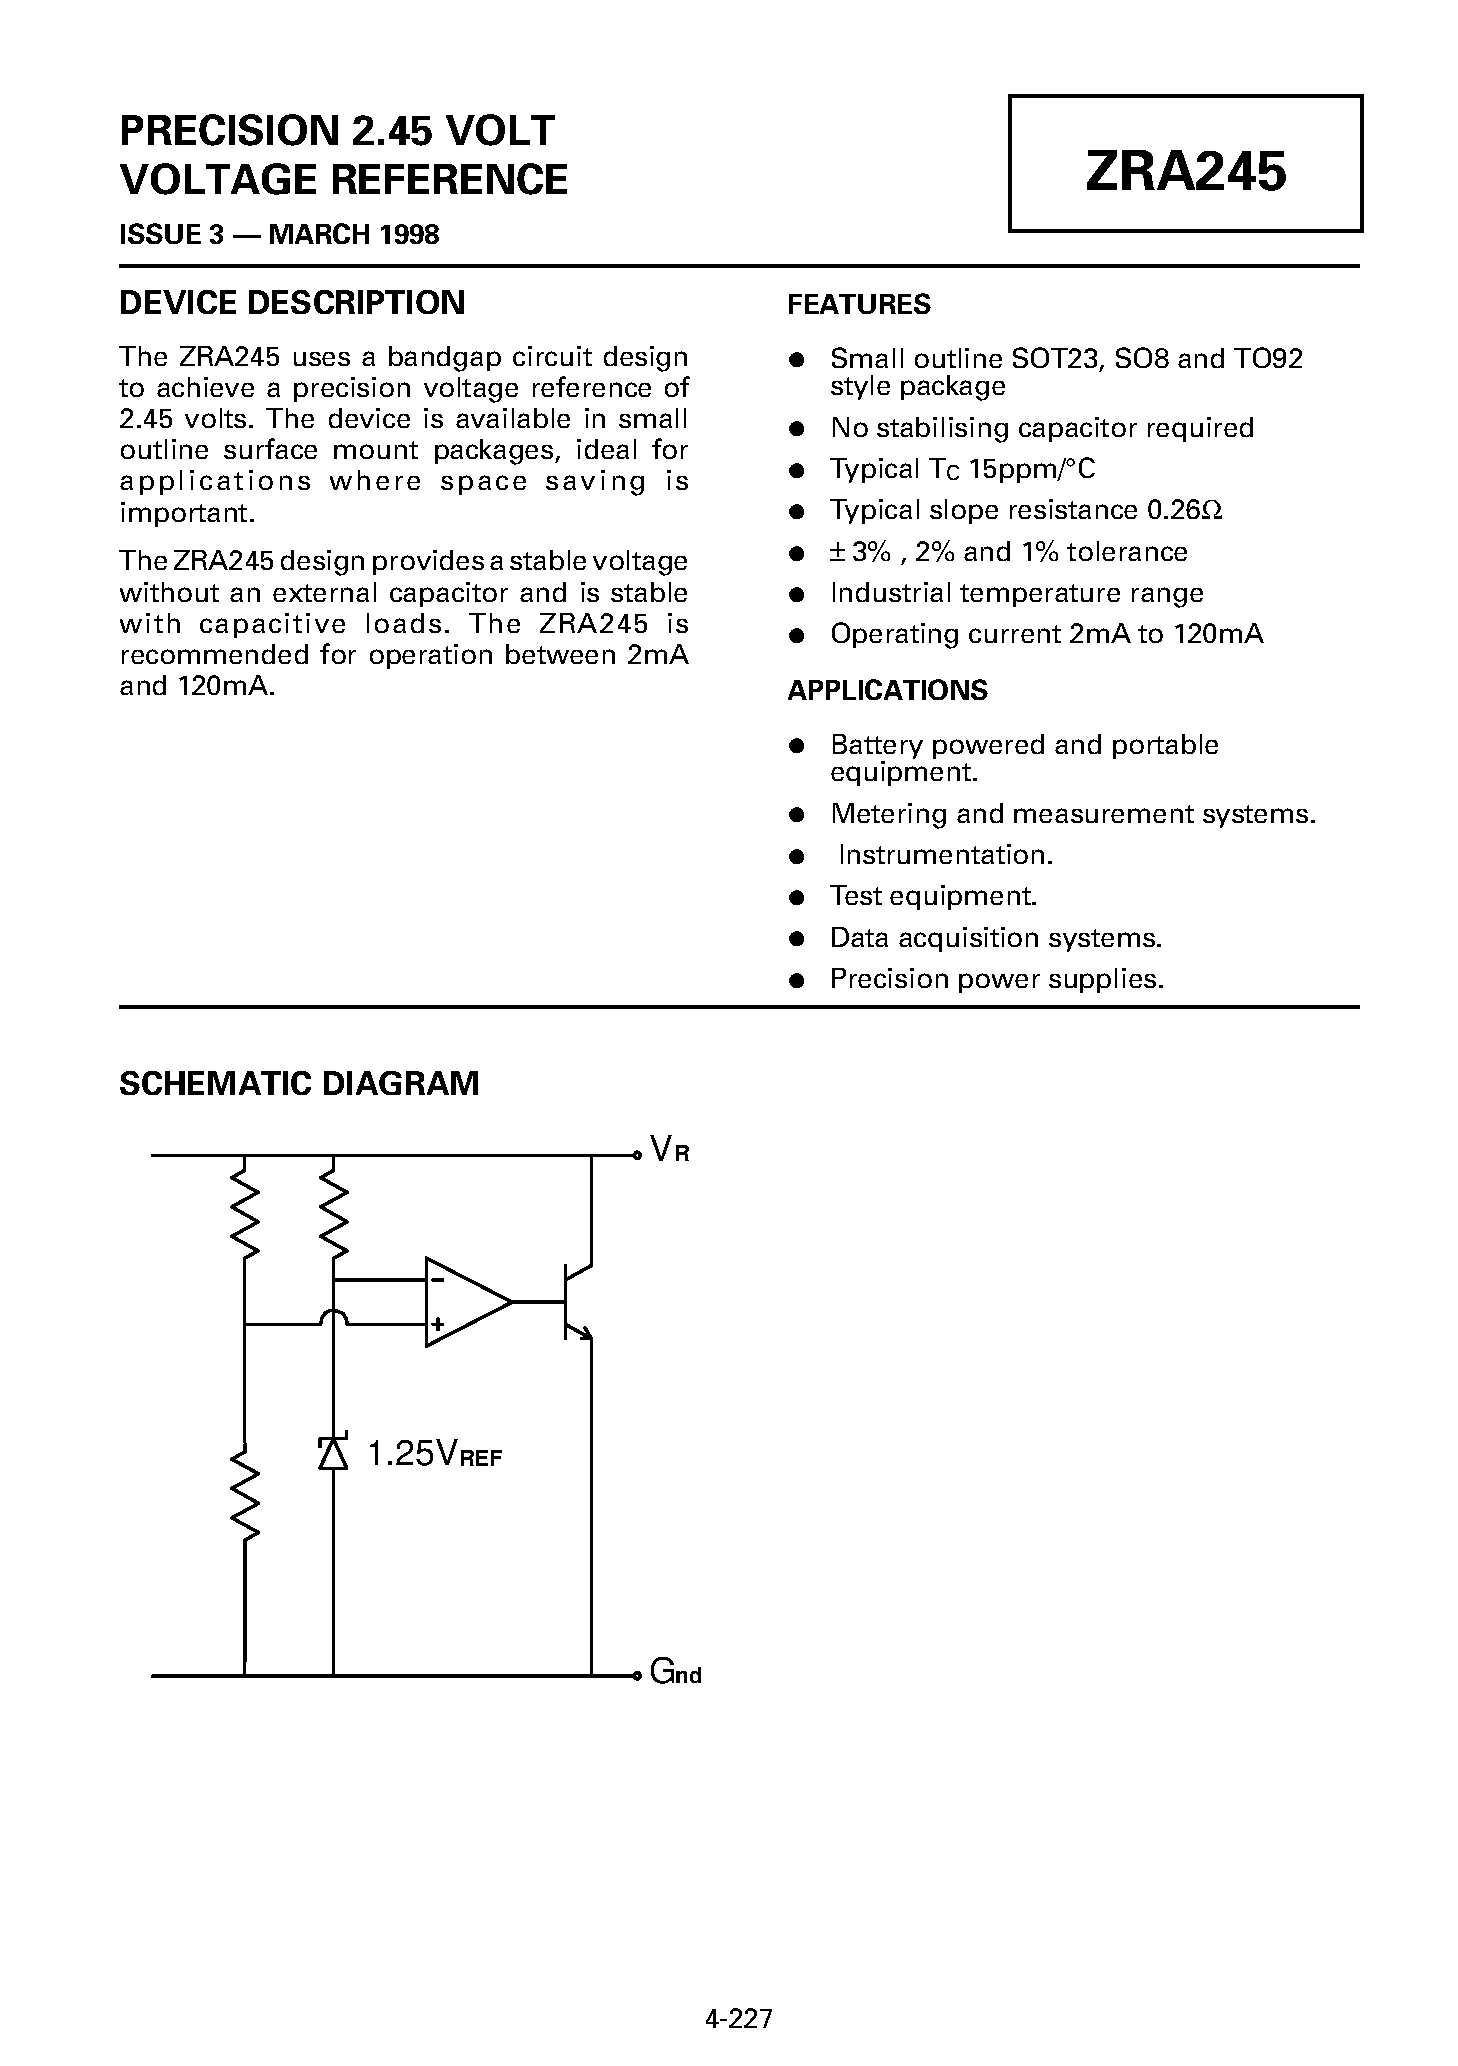 Datasheet ZRA245Y01 - PRECISION 2.45 VOLT VOLTAGE REFERENCE page 1